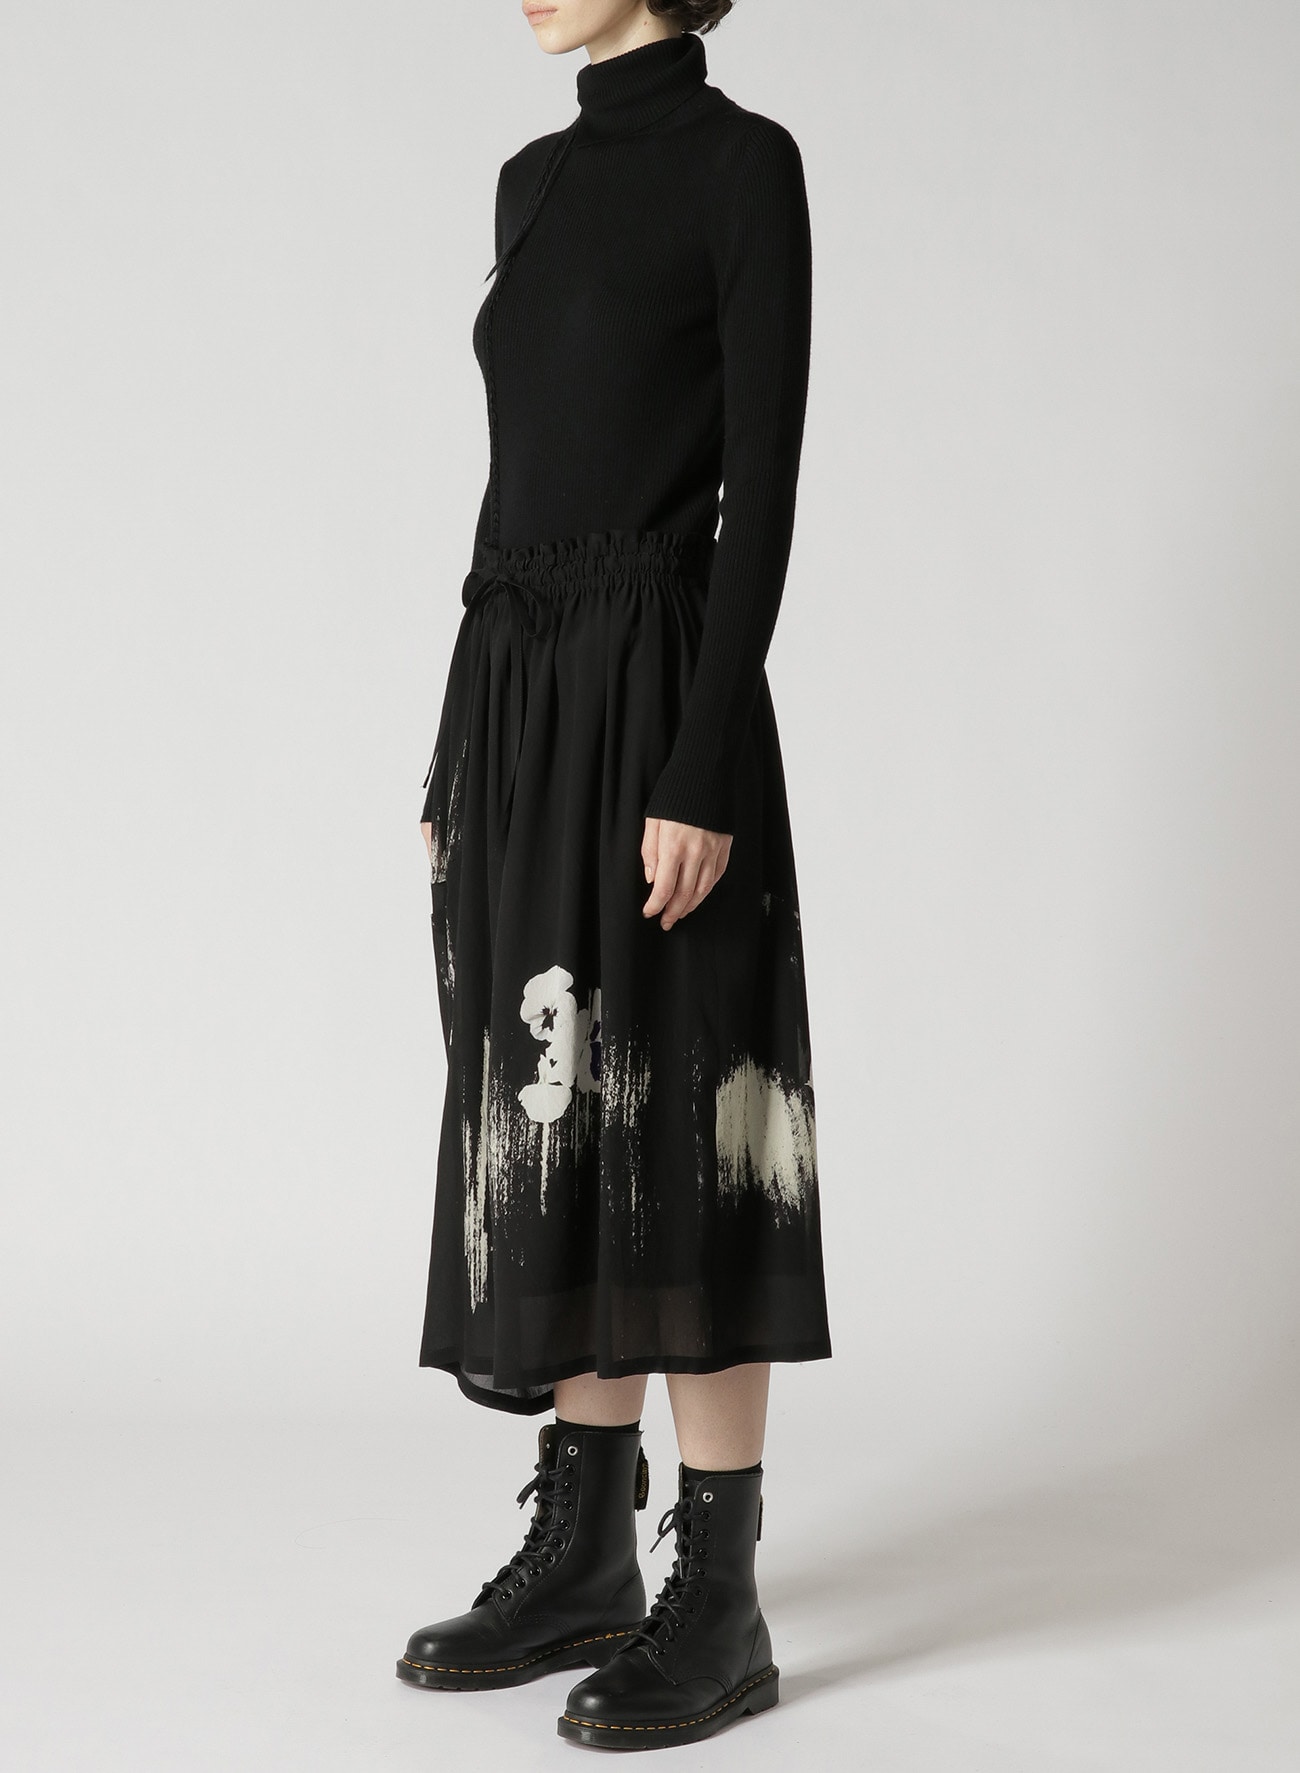 BLURRED PANSY PRINT SIDE-PLEATED SKIRT